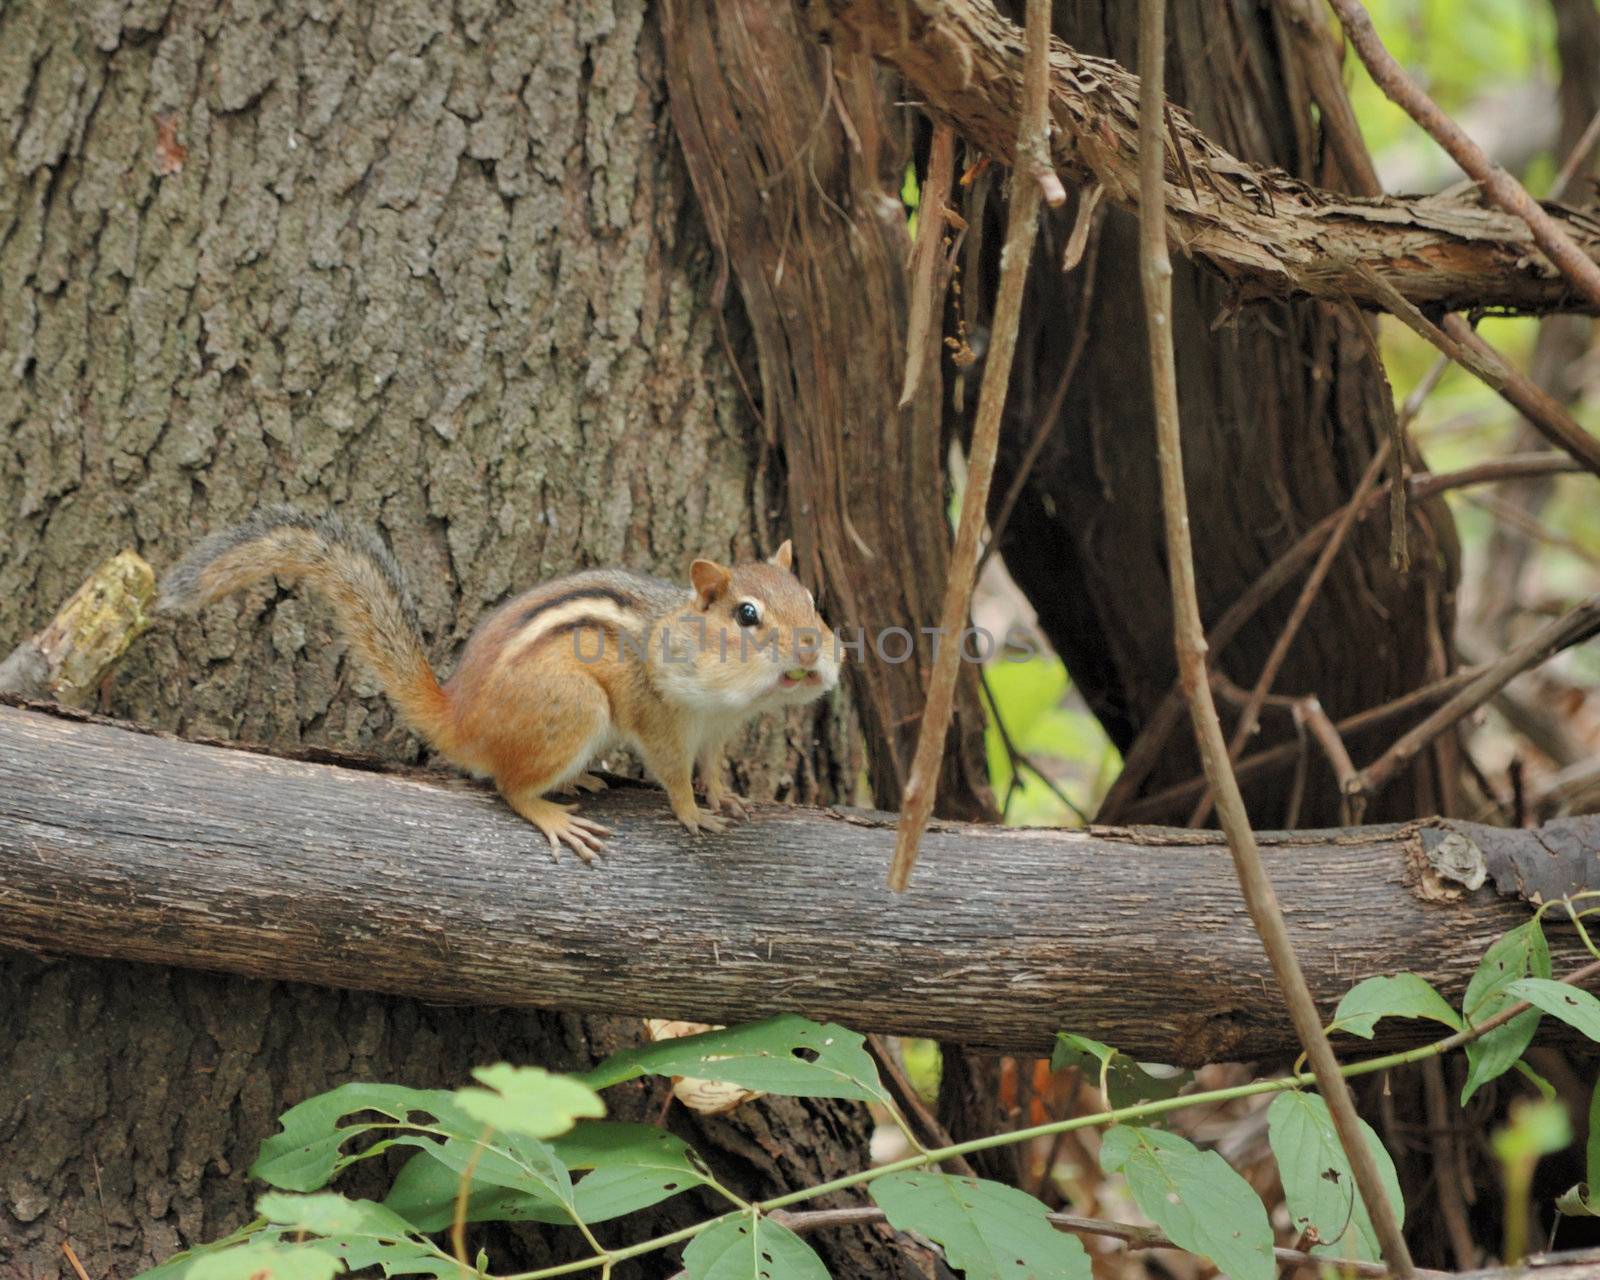 An eastern chipmunk perched on a tree branch.